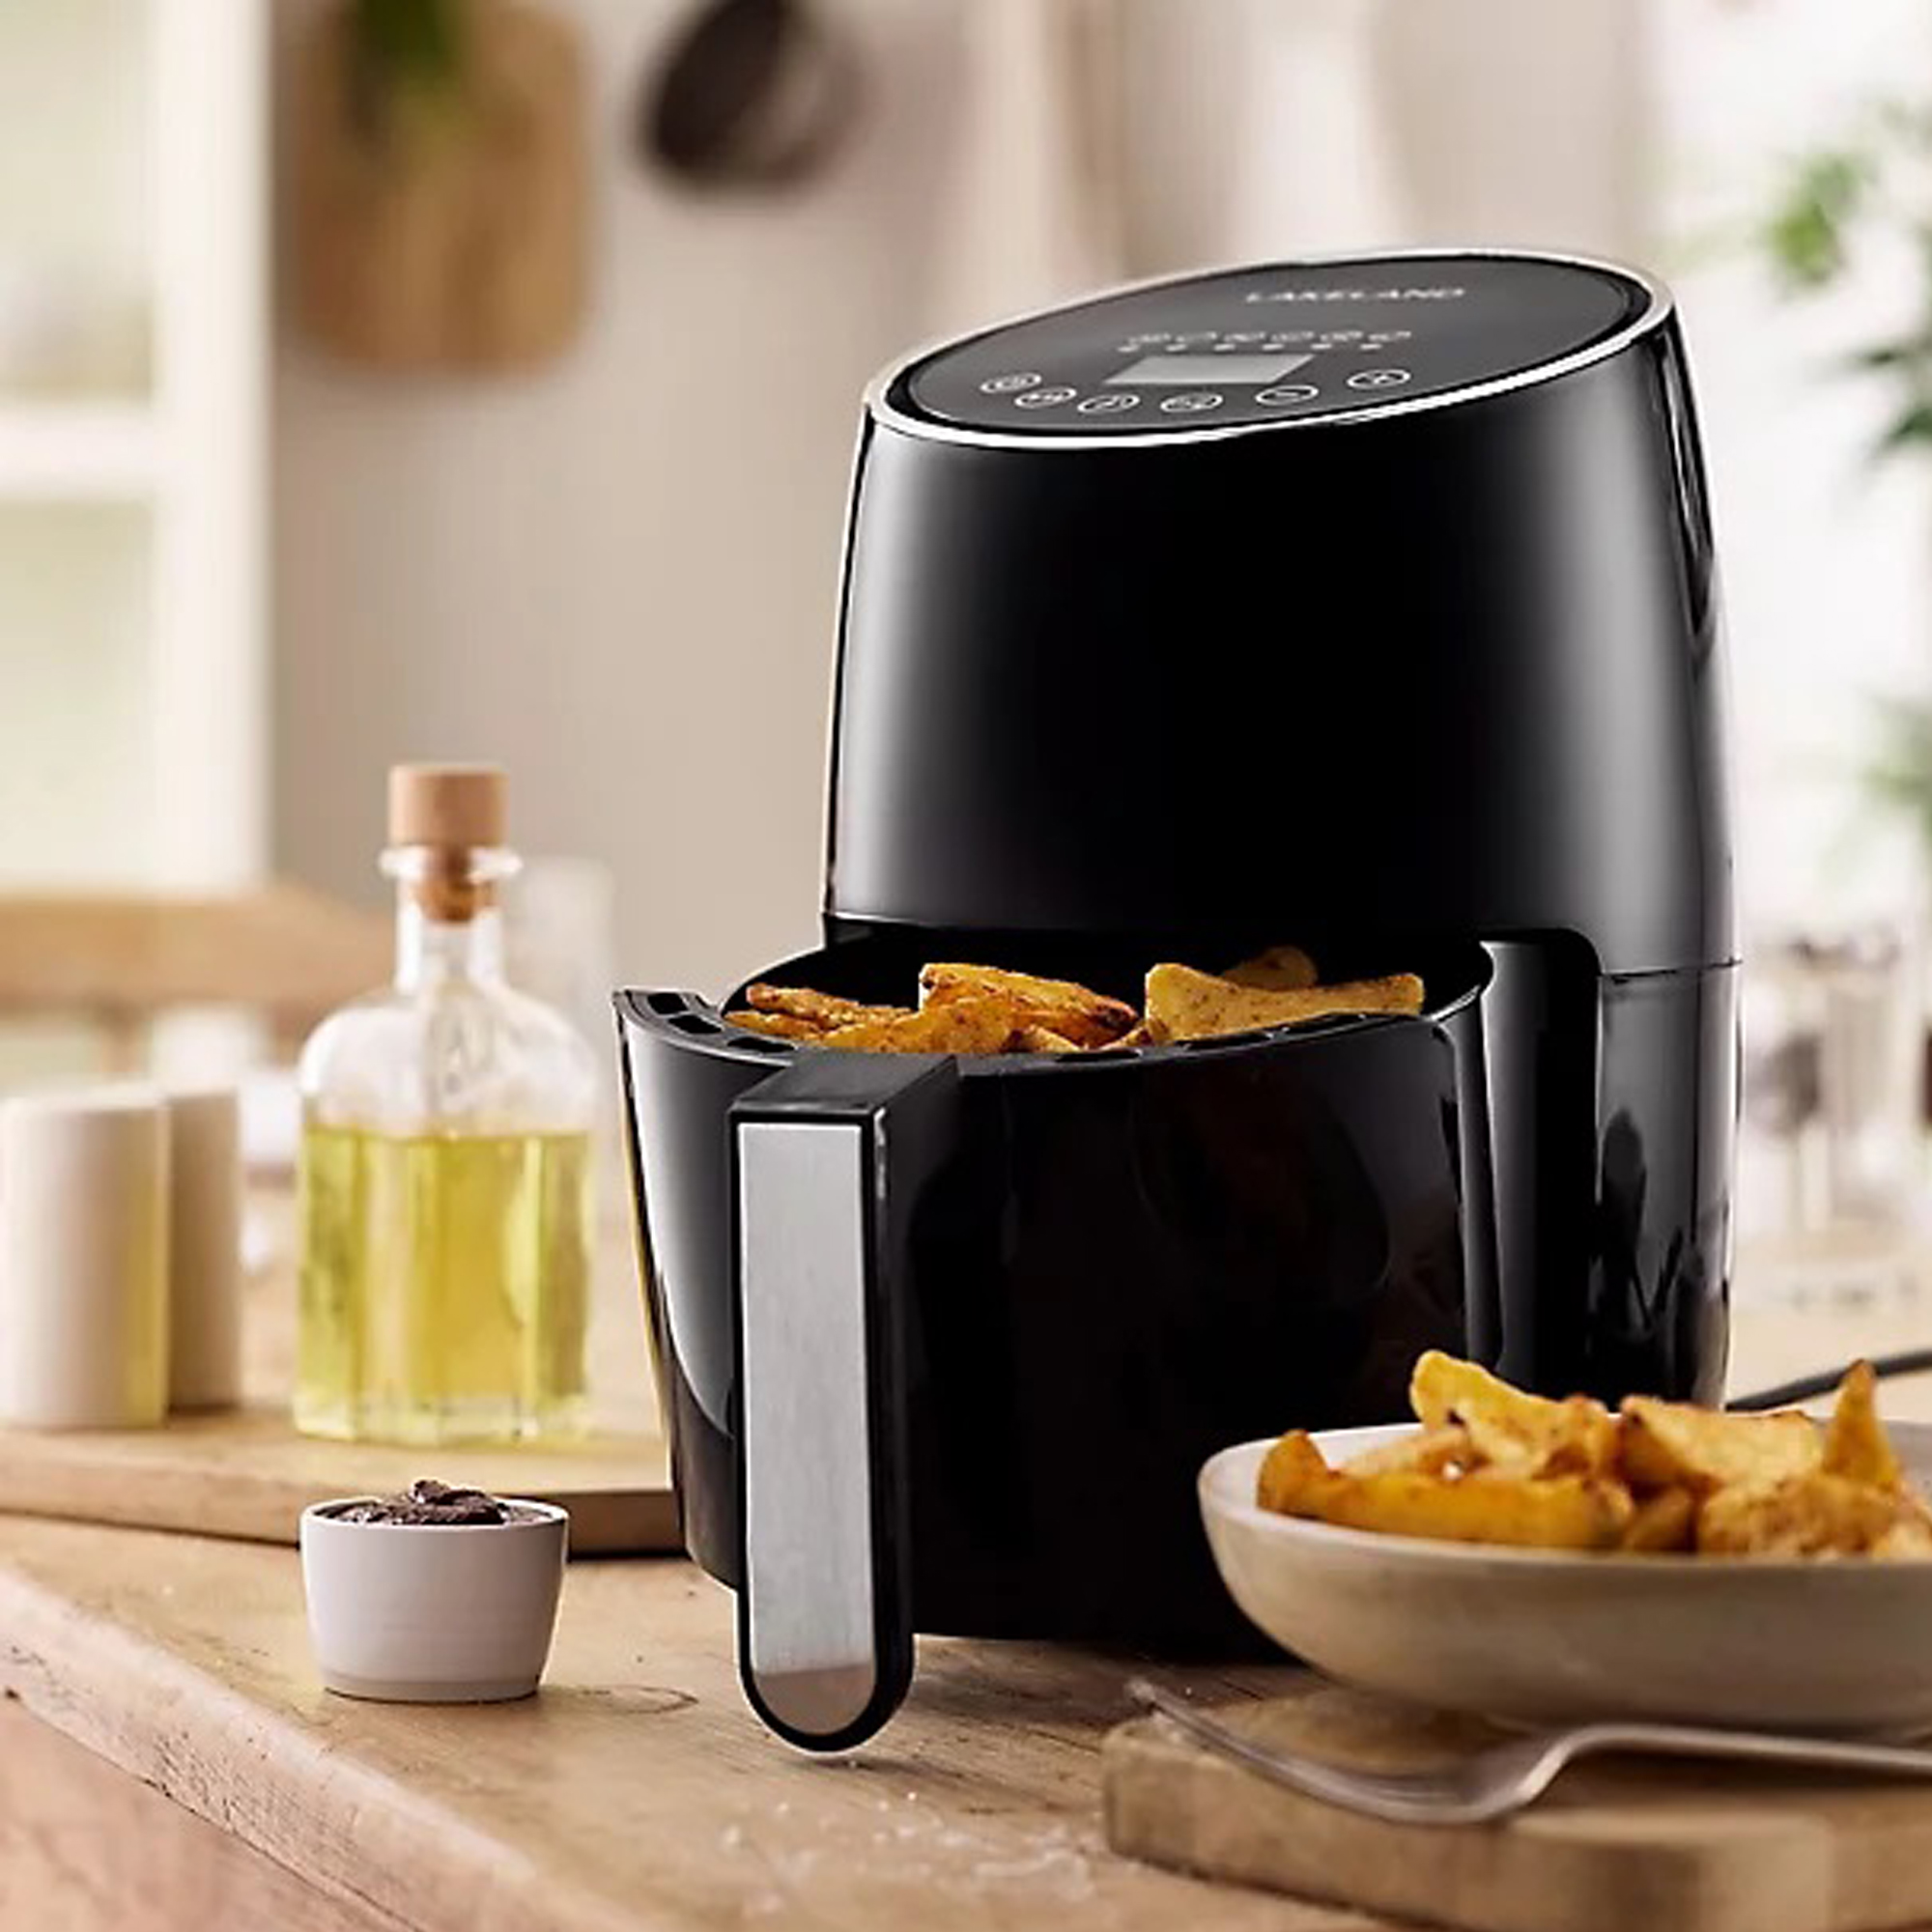 How to Clean Your Air Fryer - Lakeland Inspiration